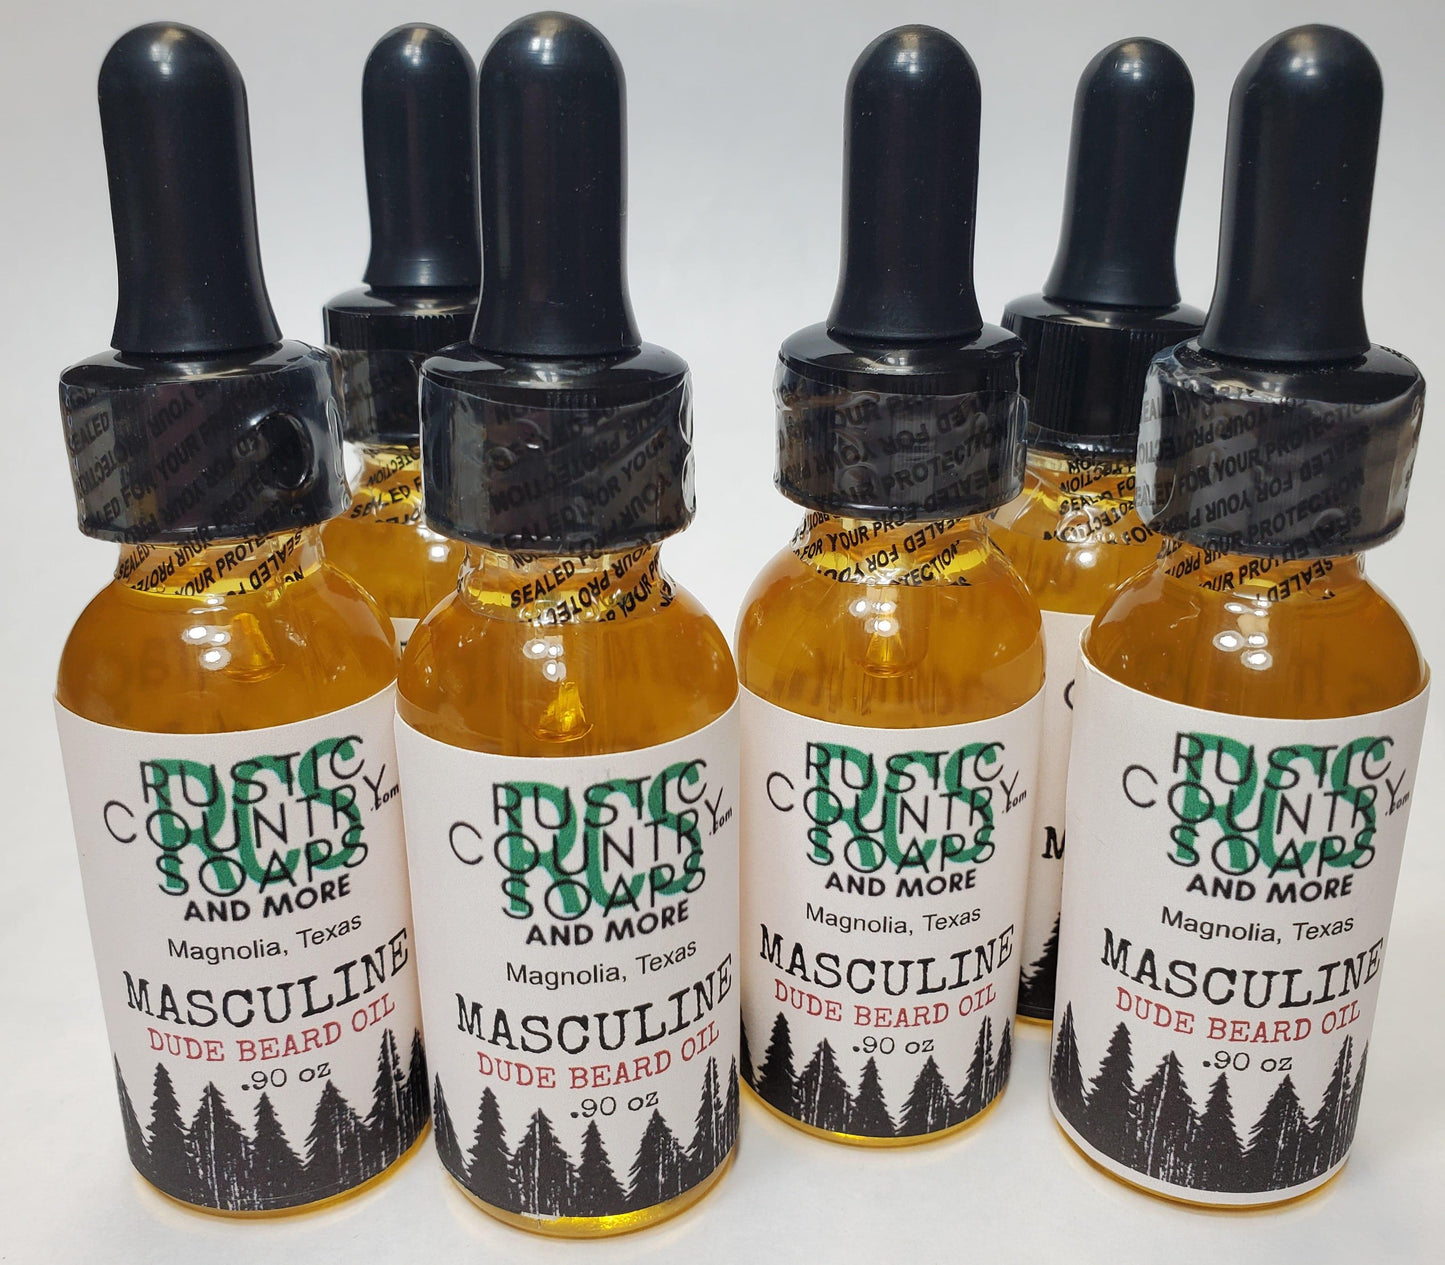 Masculine – “Dude” Beard Oil - Rustic Country Soaps & More